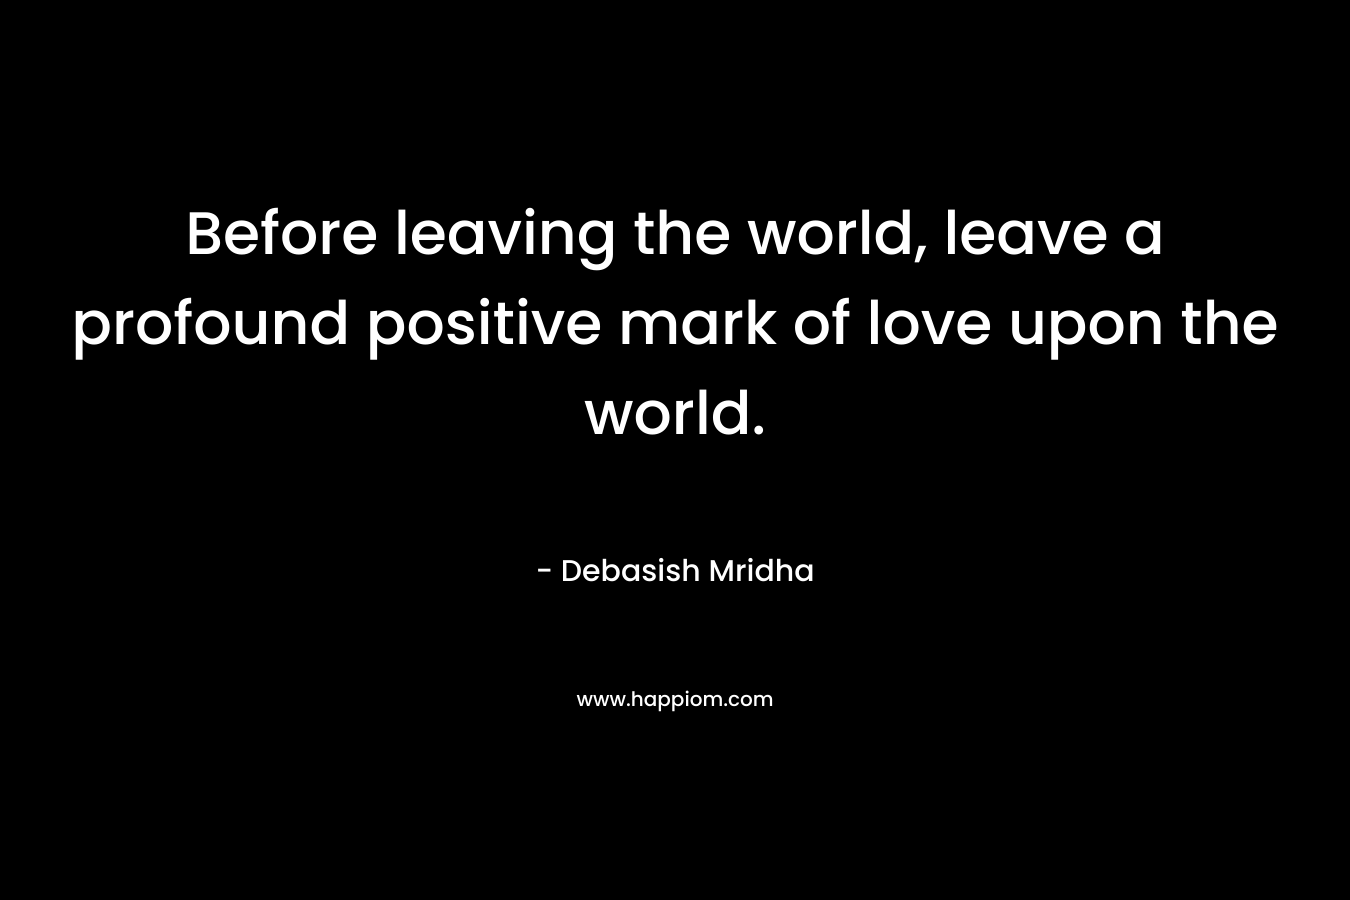 Before leaving the world, leave a profound positive mark of love upon the world.